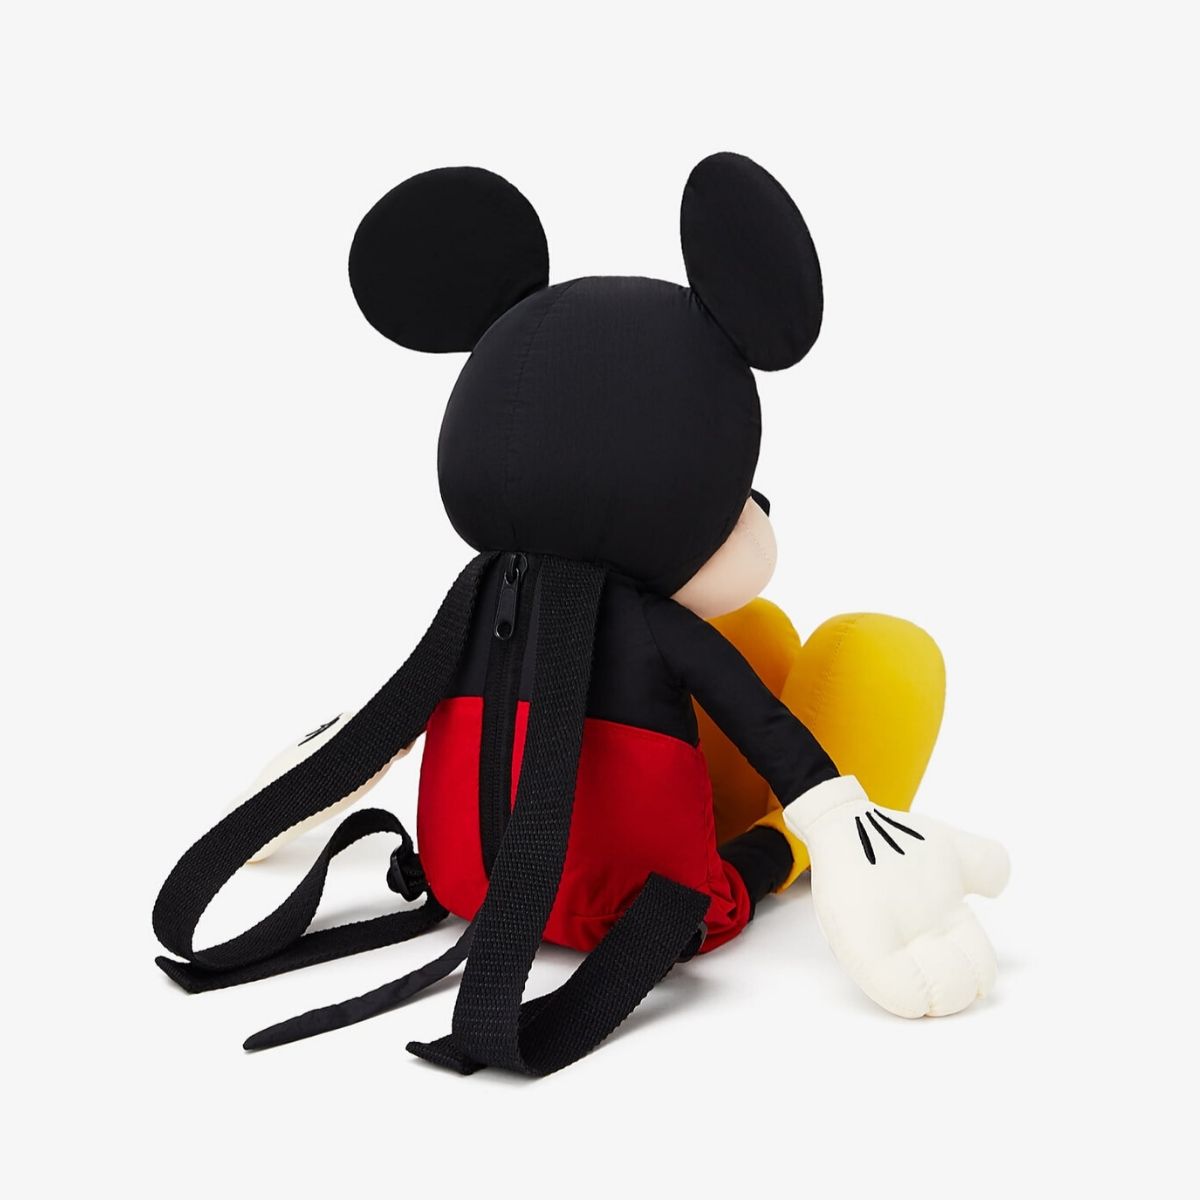 zara mickey mouse backpack